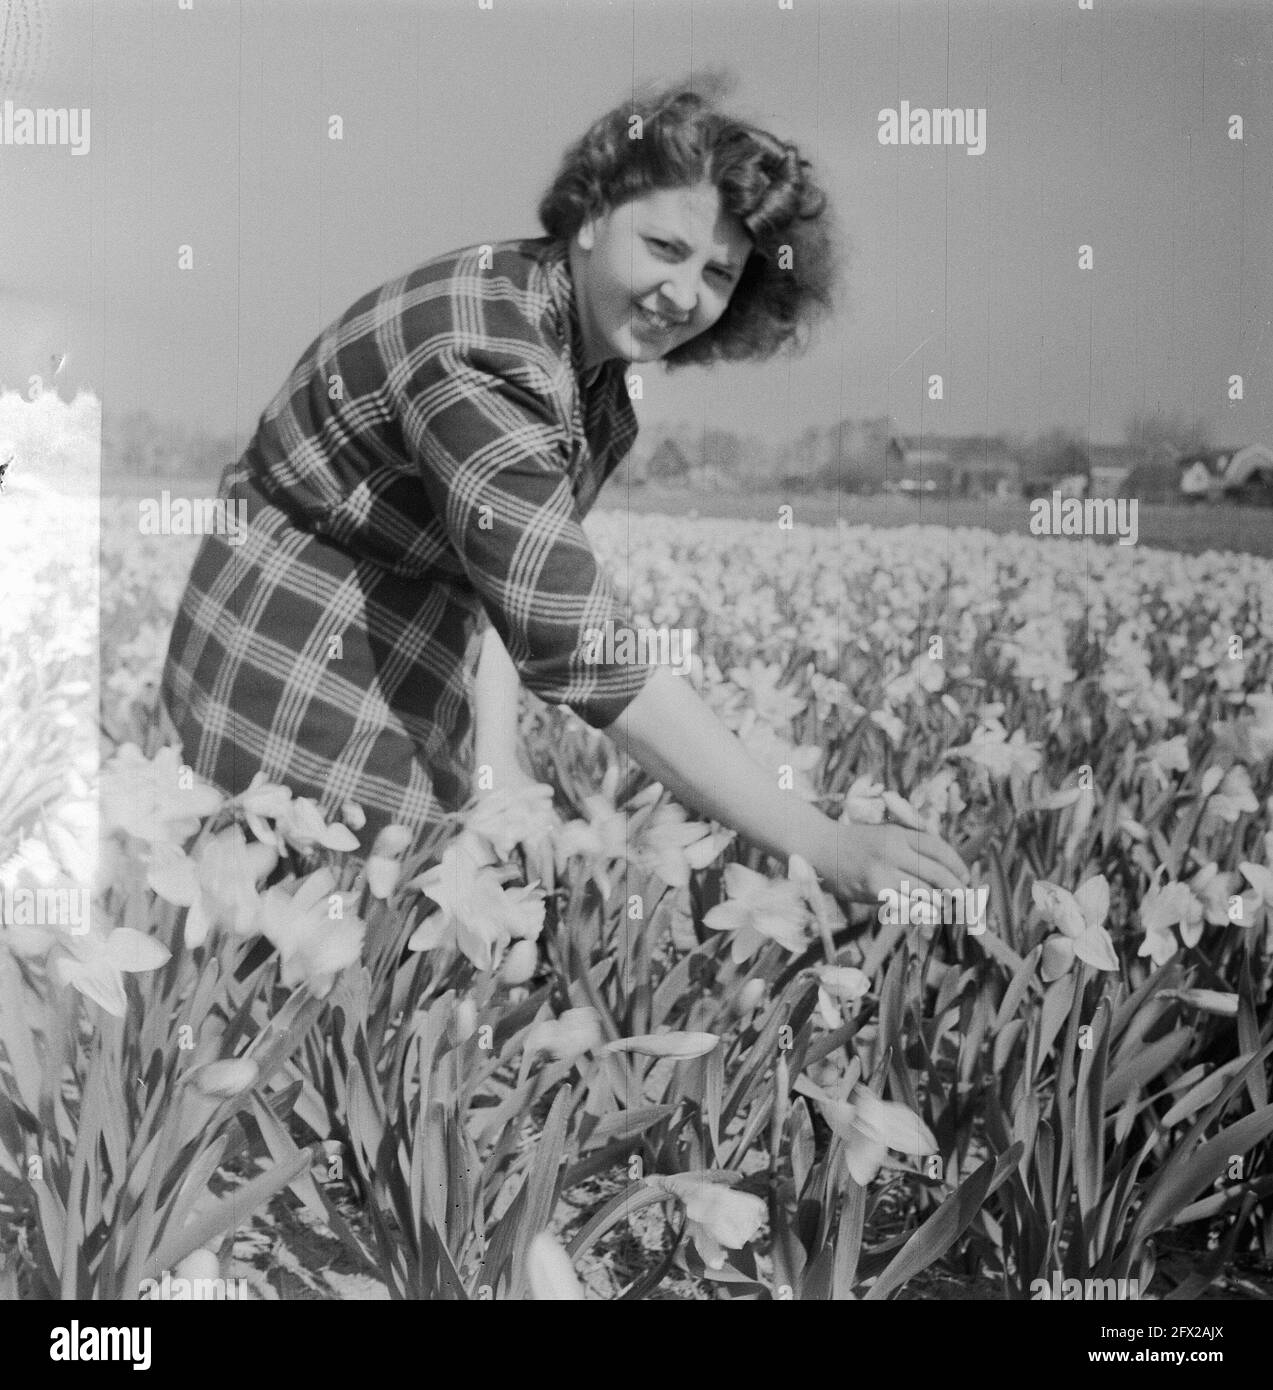 Lisse. The first daffodil field, March 26, 1953, The Netherlands, 20th century press agency photo, news to remember, documentary, historic photography 1945-1990, visual stories, human history of the Twentieth Century, capturing moments in time Stock Photo